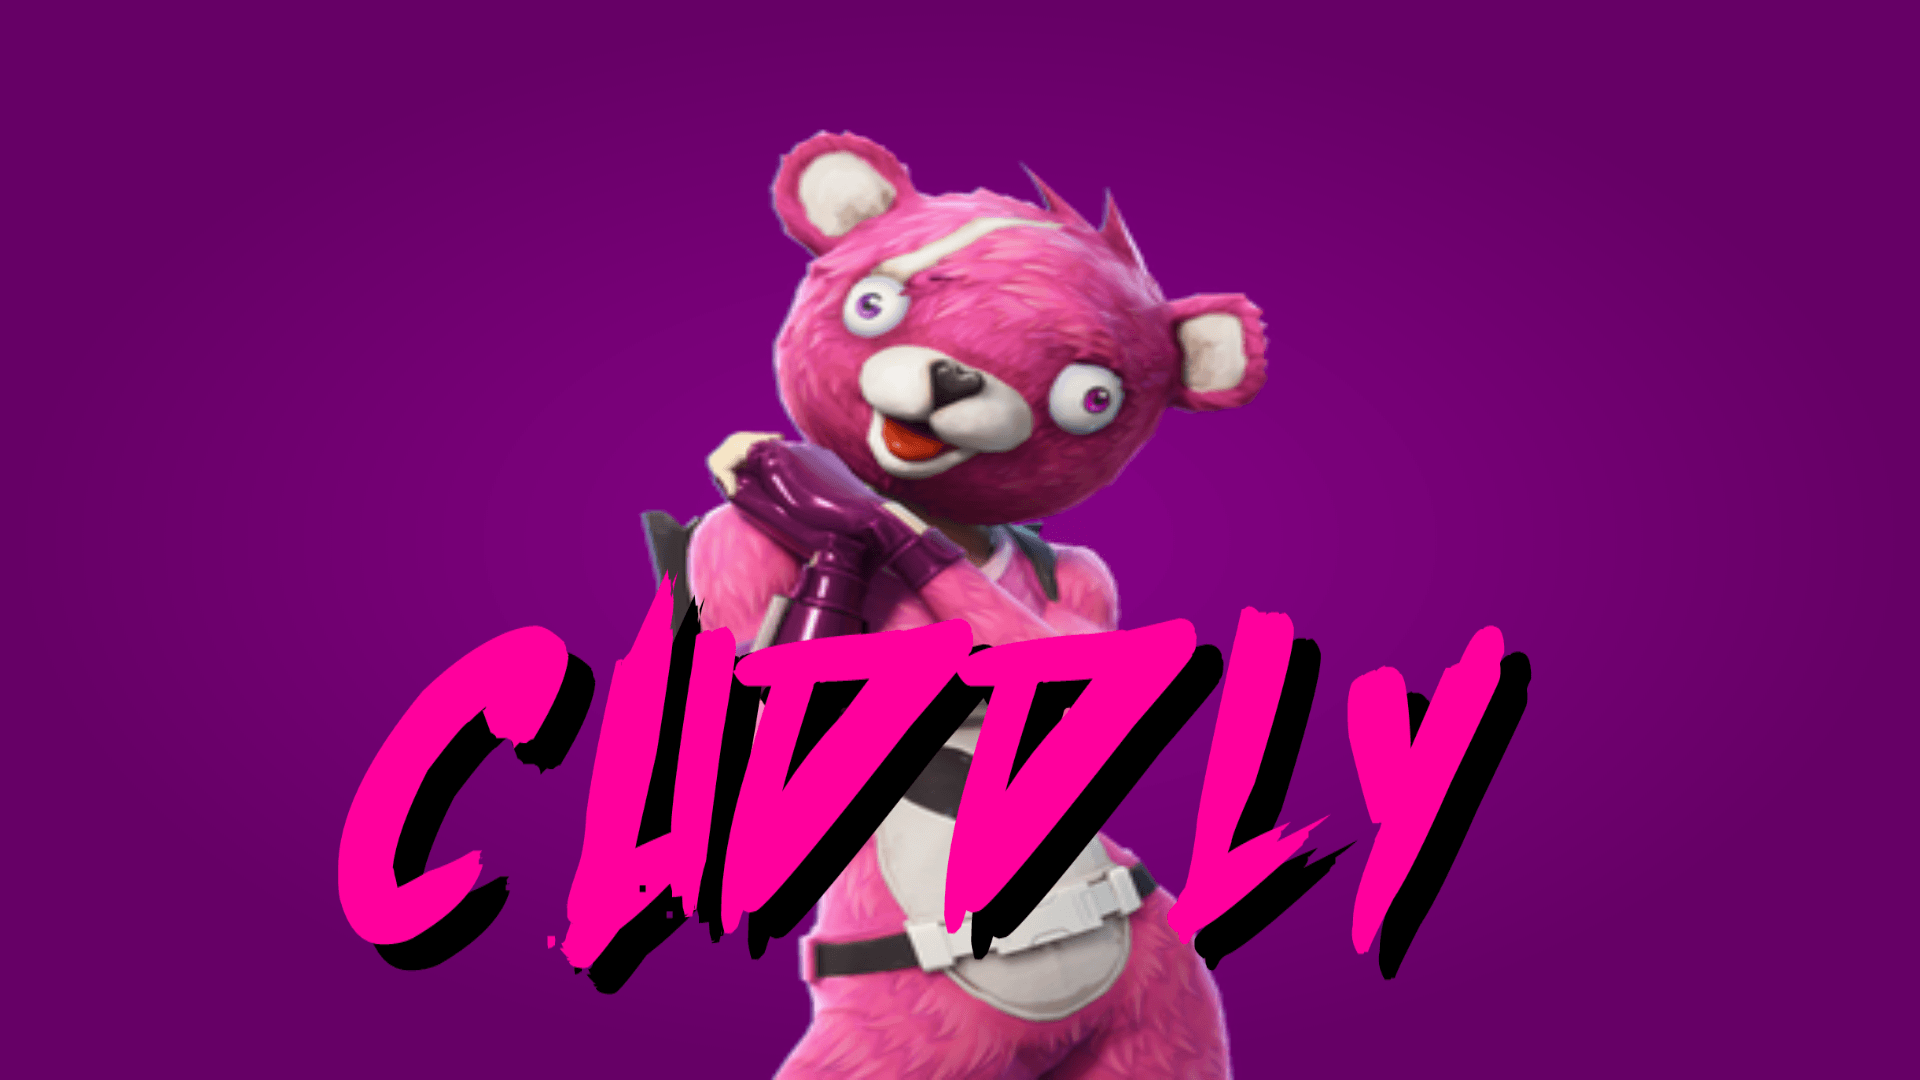 Wallpaper Of Cuddle Team Leader From Fortnite